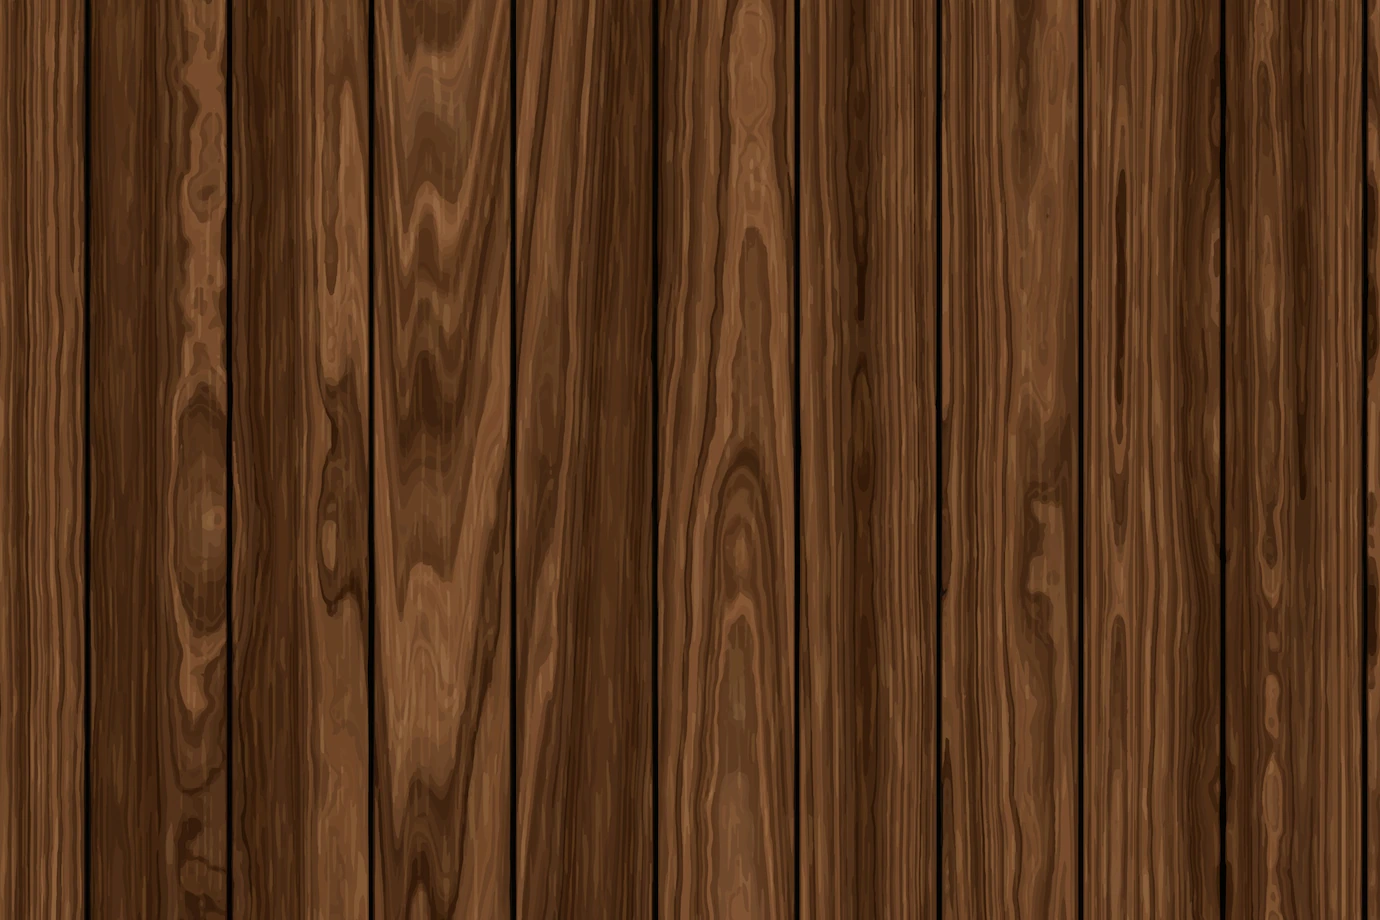 Realistic Wood Texture Background 23 2149221131